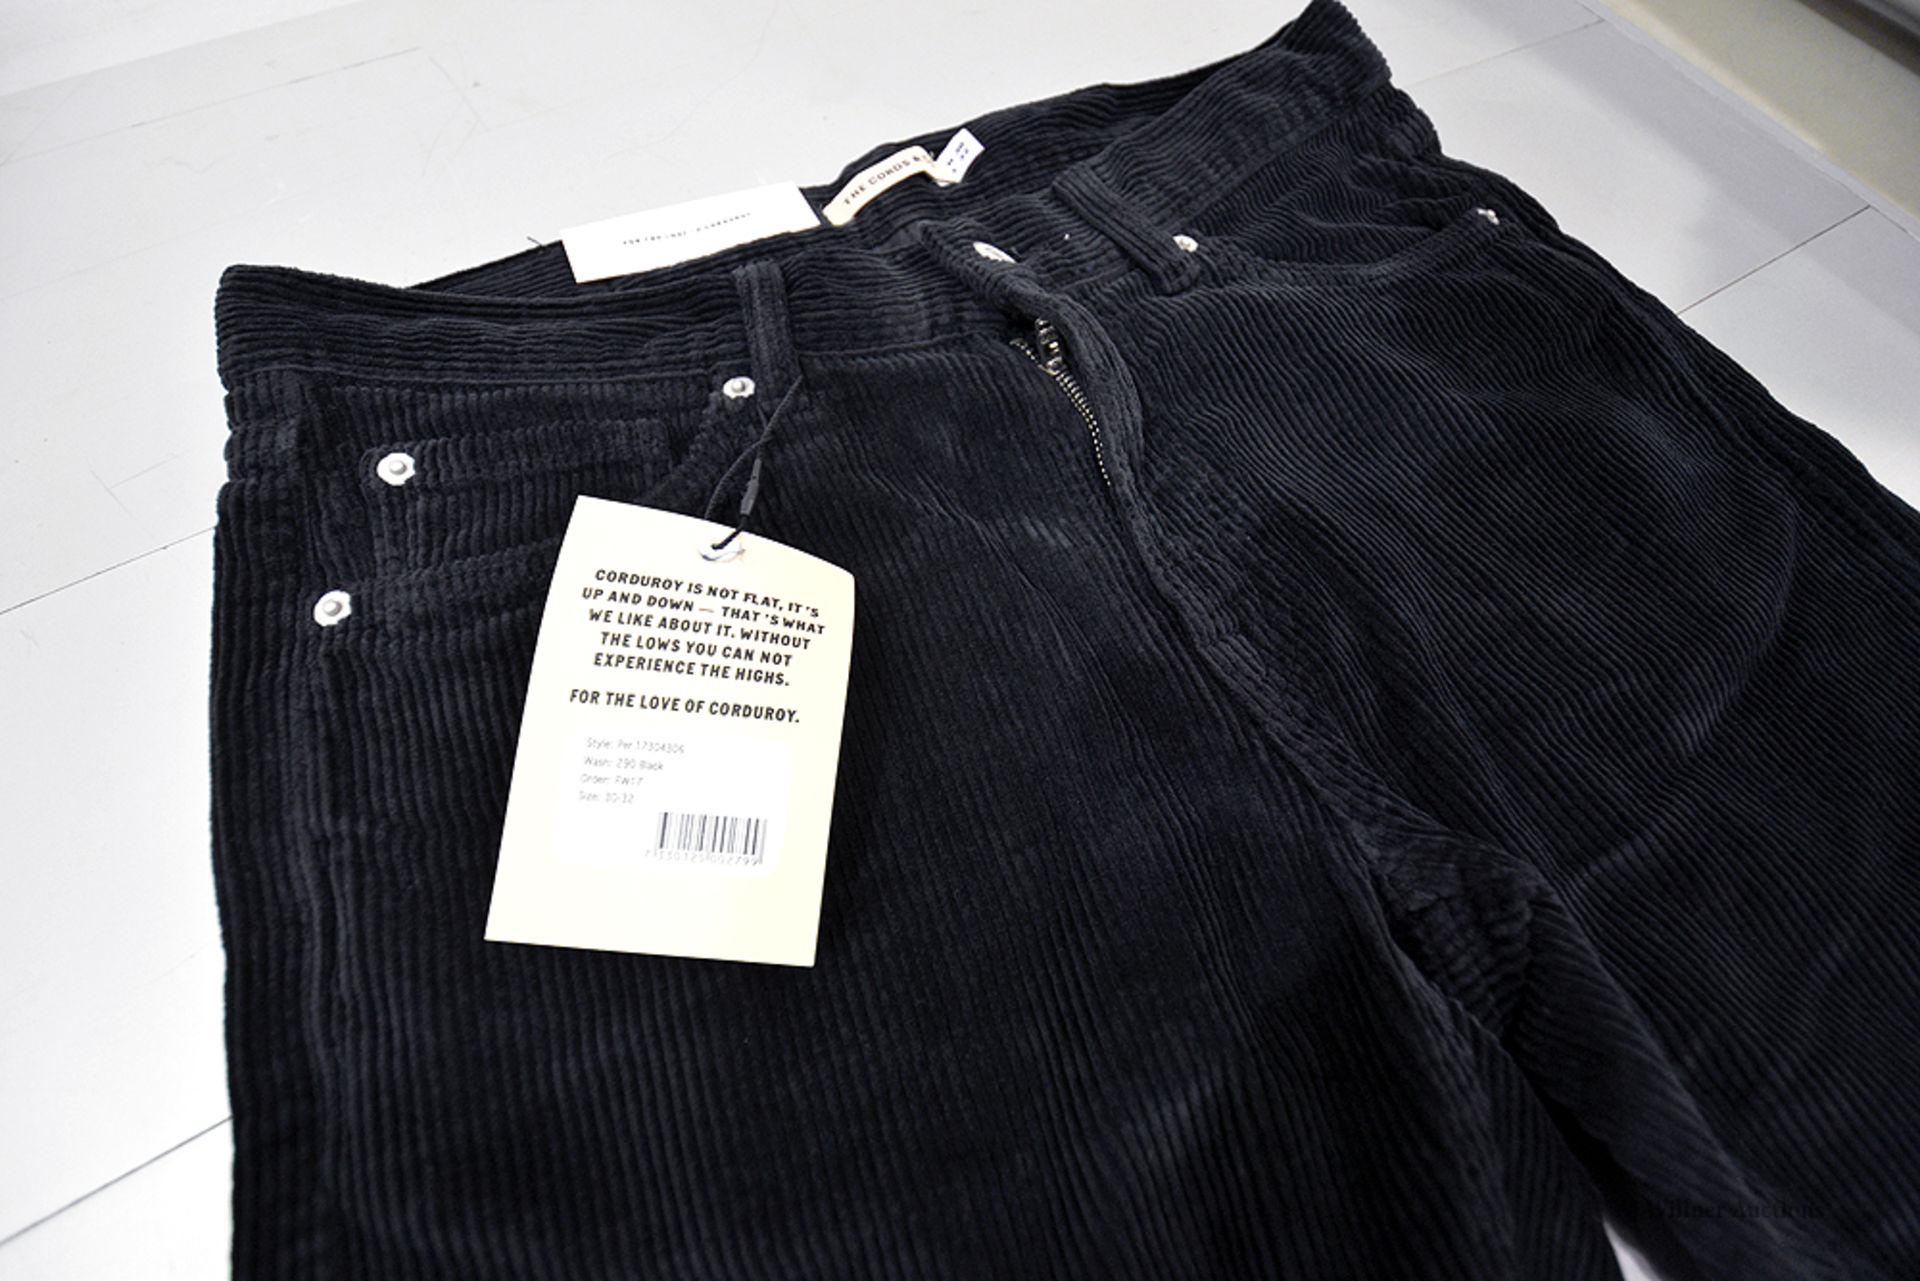 THE CORDS & CO. "PER" MEN'S/HIGH-WAIST/ STRAIGHT FIT/ NARROW LEG MSRP $160 - Image 5 of 5